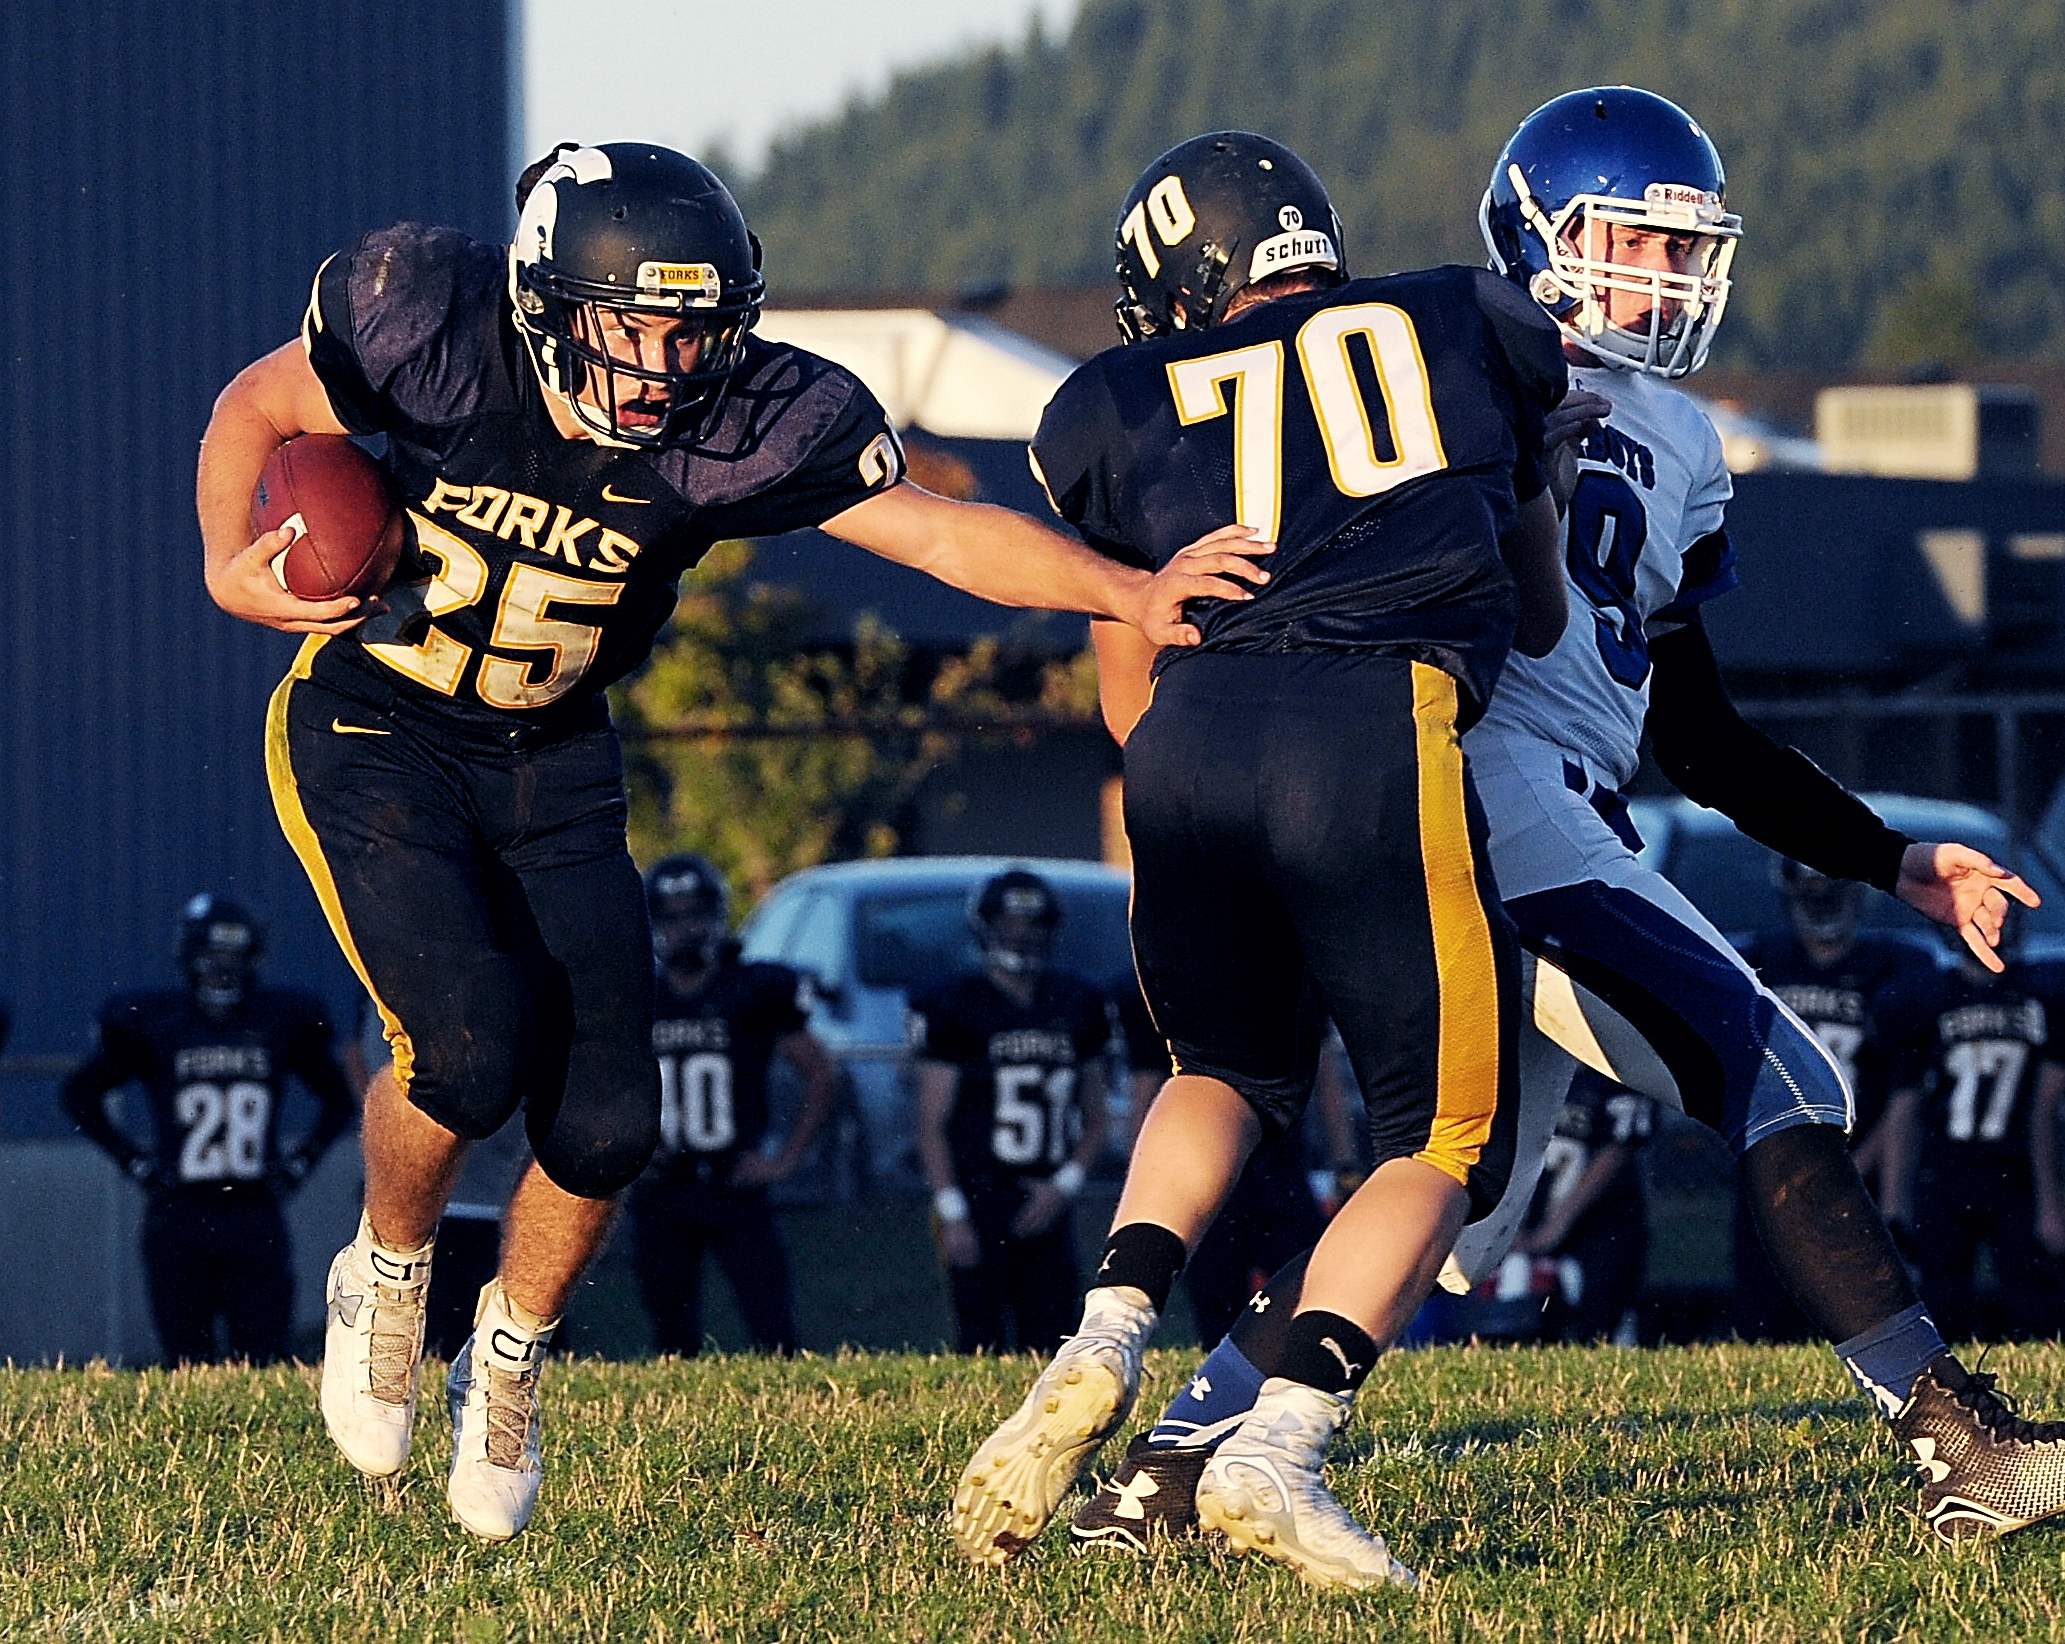 Forks running back Kenny Gale against Chimacum behind the block of Jack Dahlgren last month. Lonnie Archibald/for Peninsula Daily News